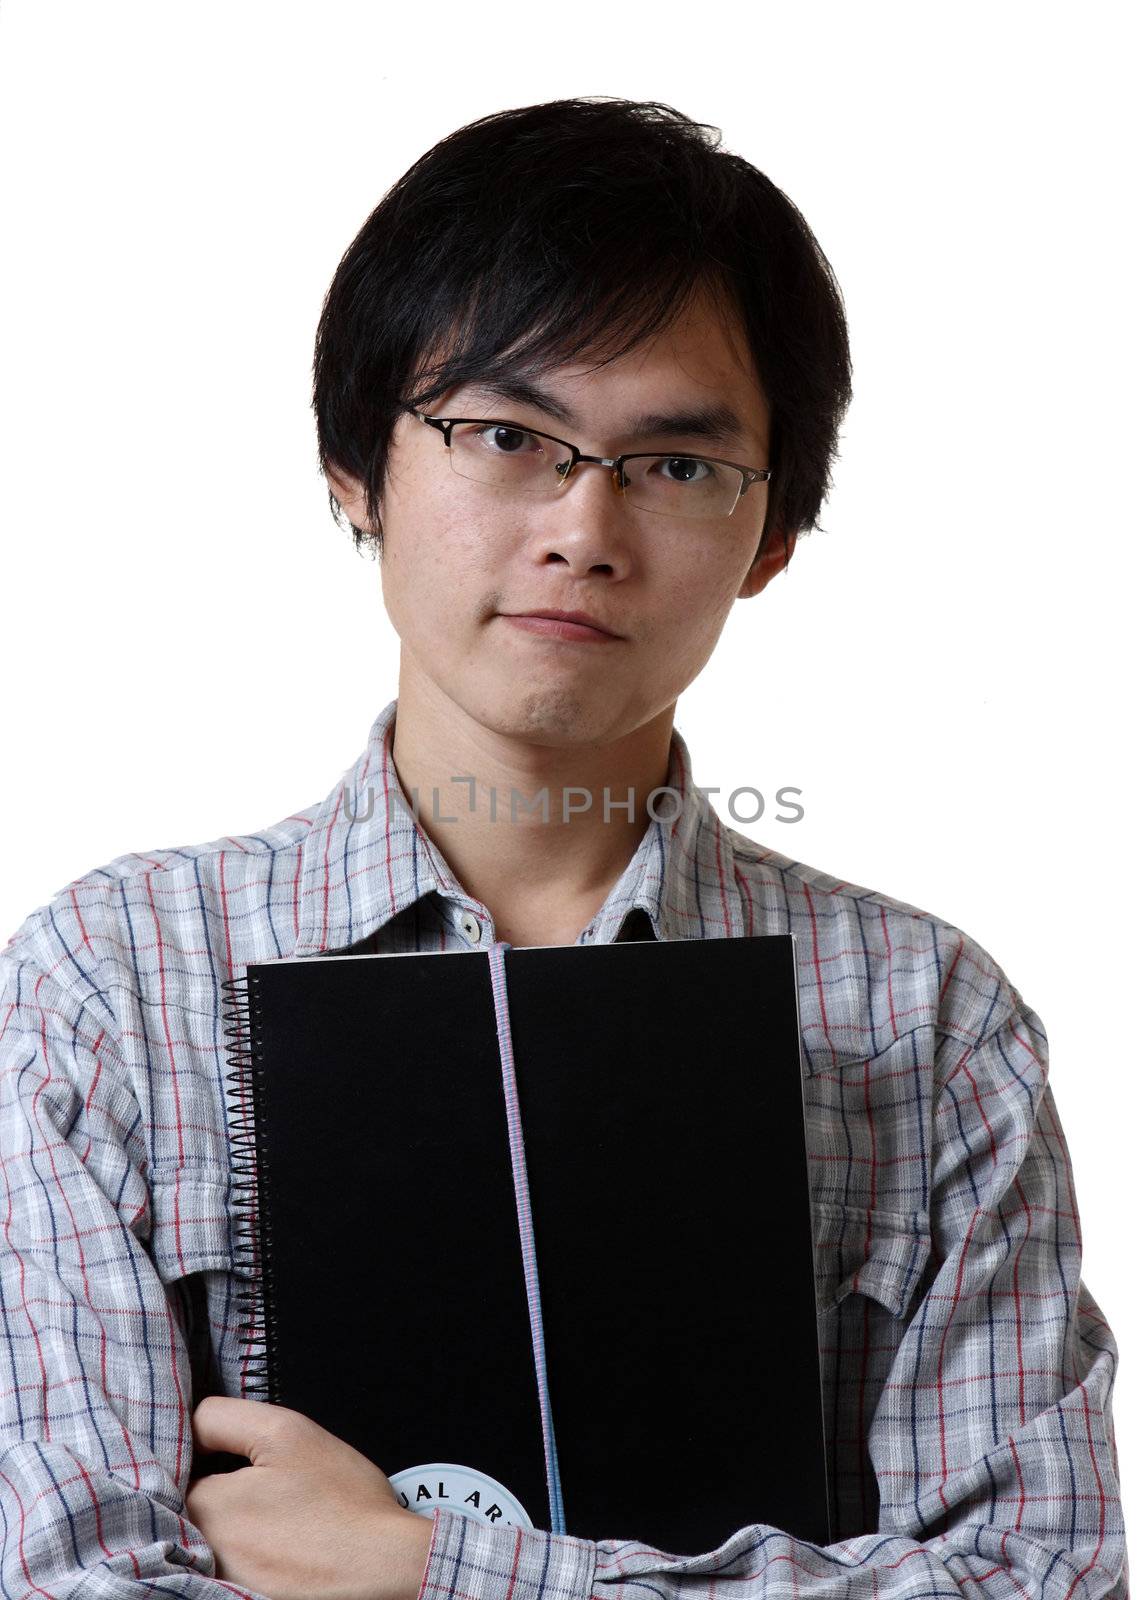 student hand holding book over white background